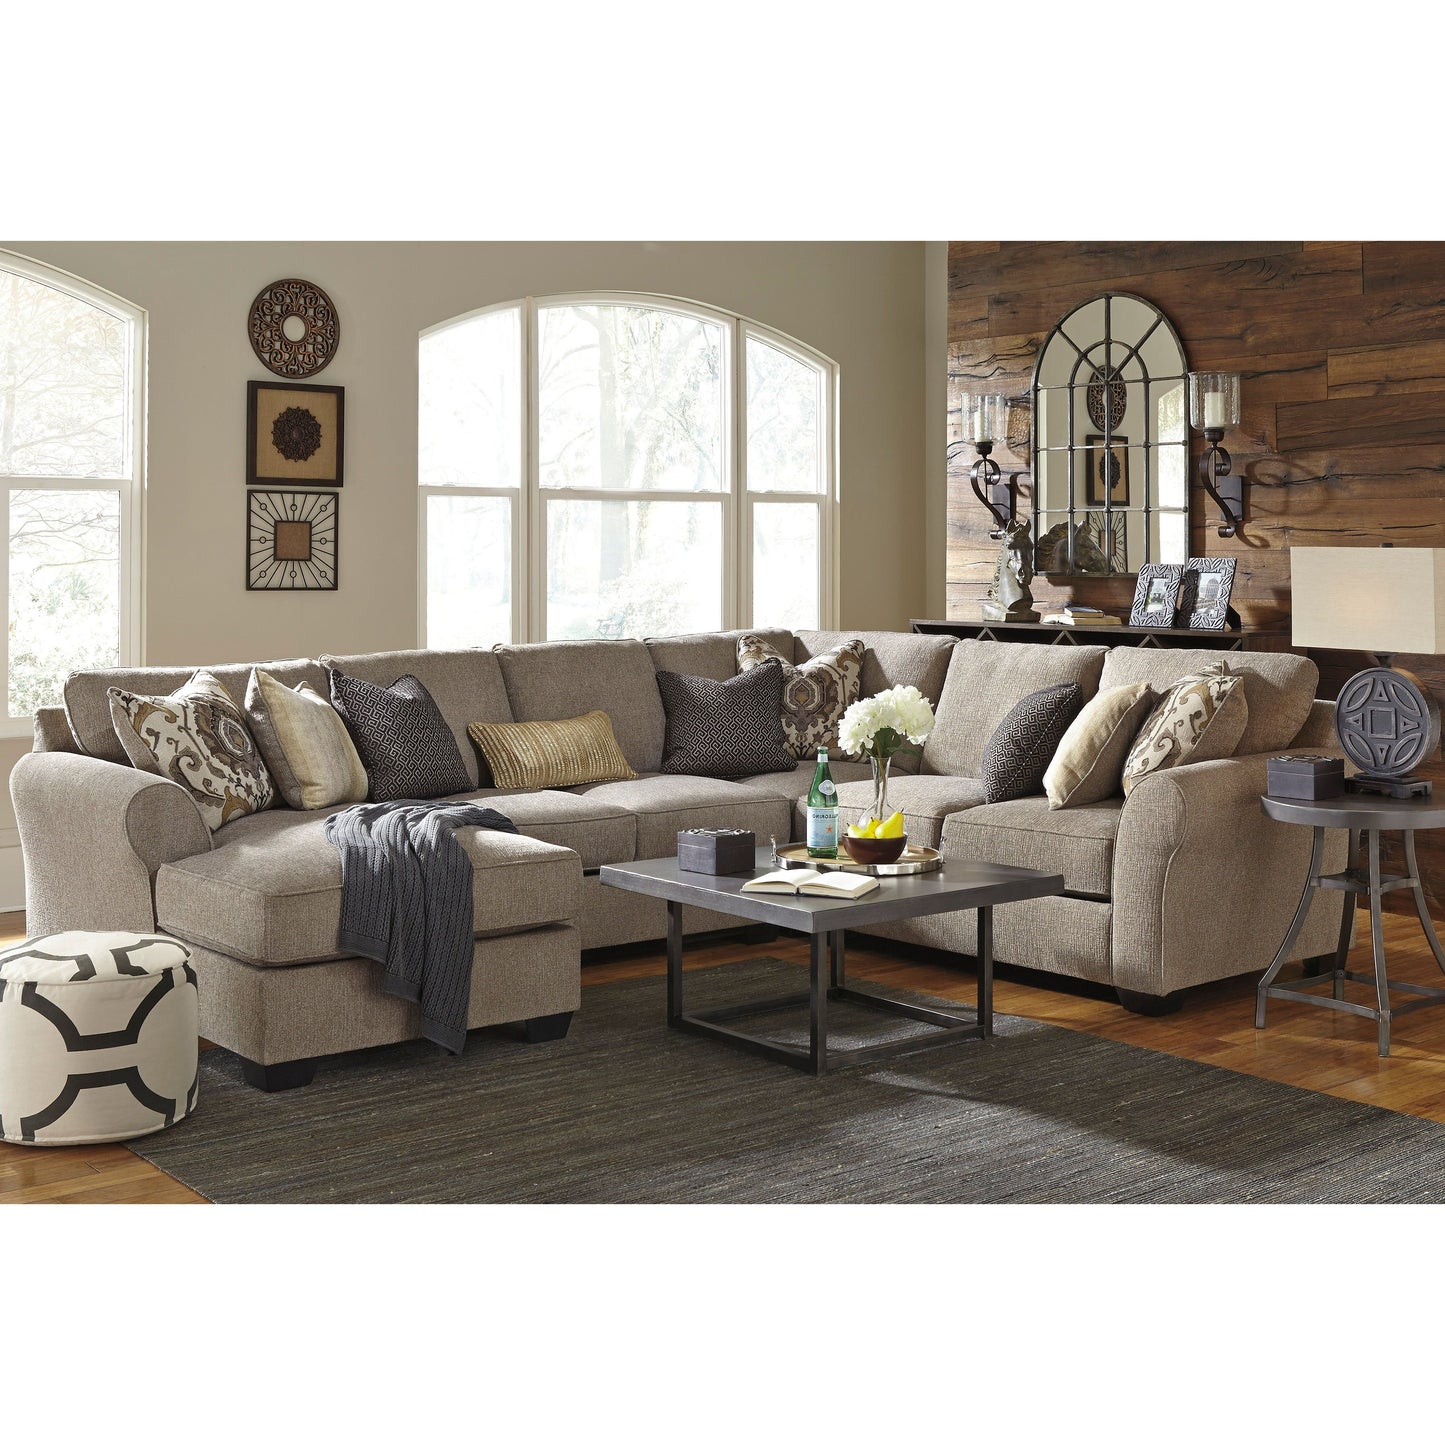 PANTOMINE 4 PIECE SECTIONAL - DRIFTWOOD